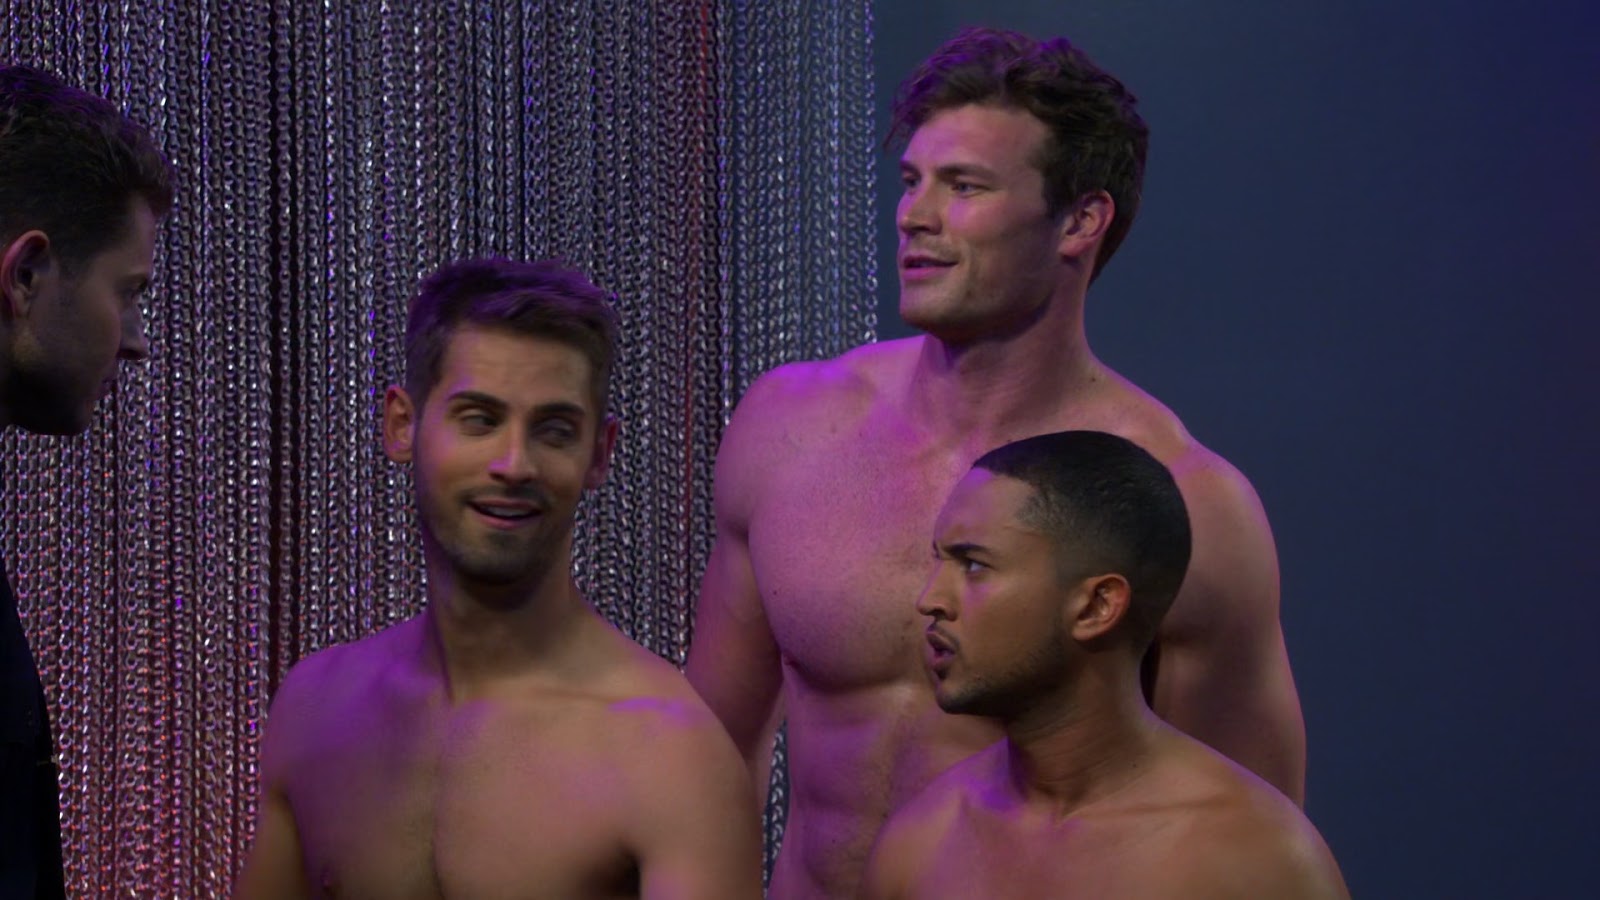 Derek Theler, Jean-Luc Bilodeau and Tahj Mowry shirtless in Baby Daddy 4-01...